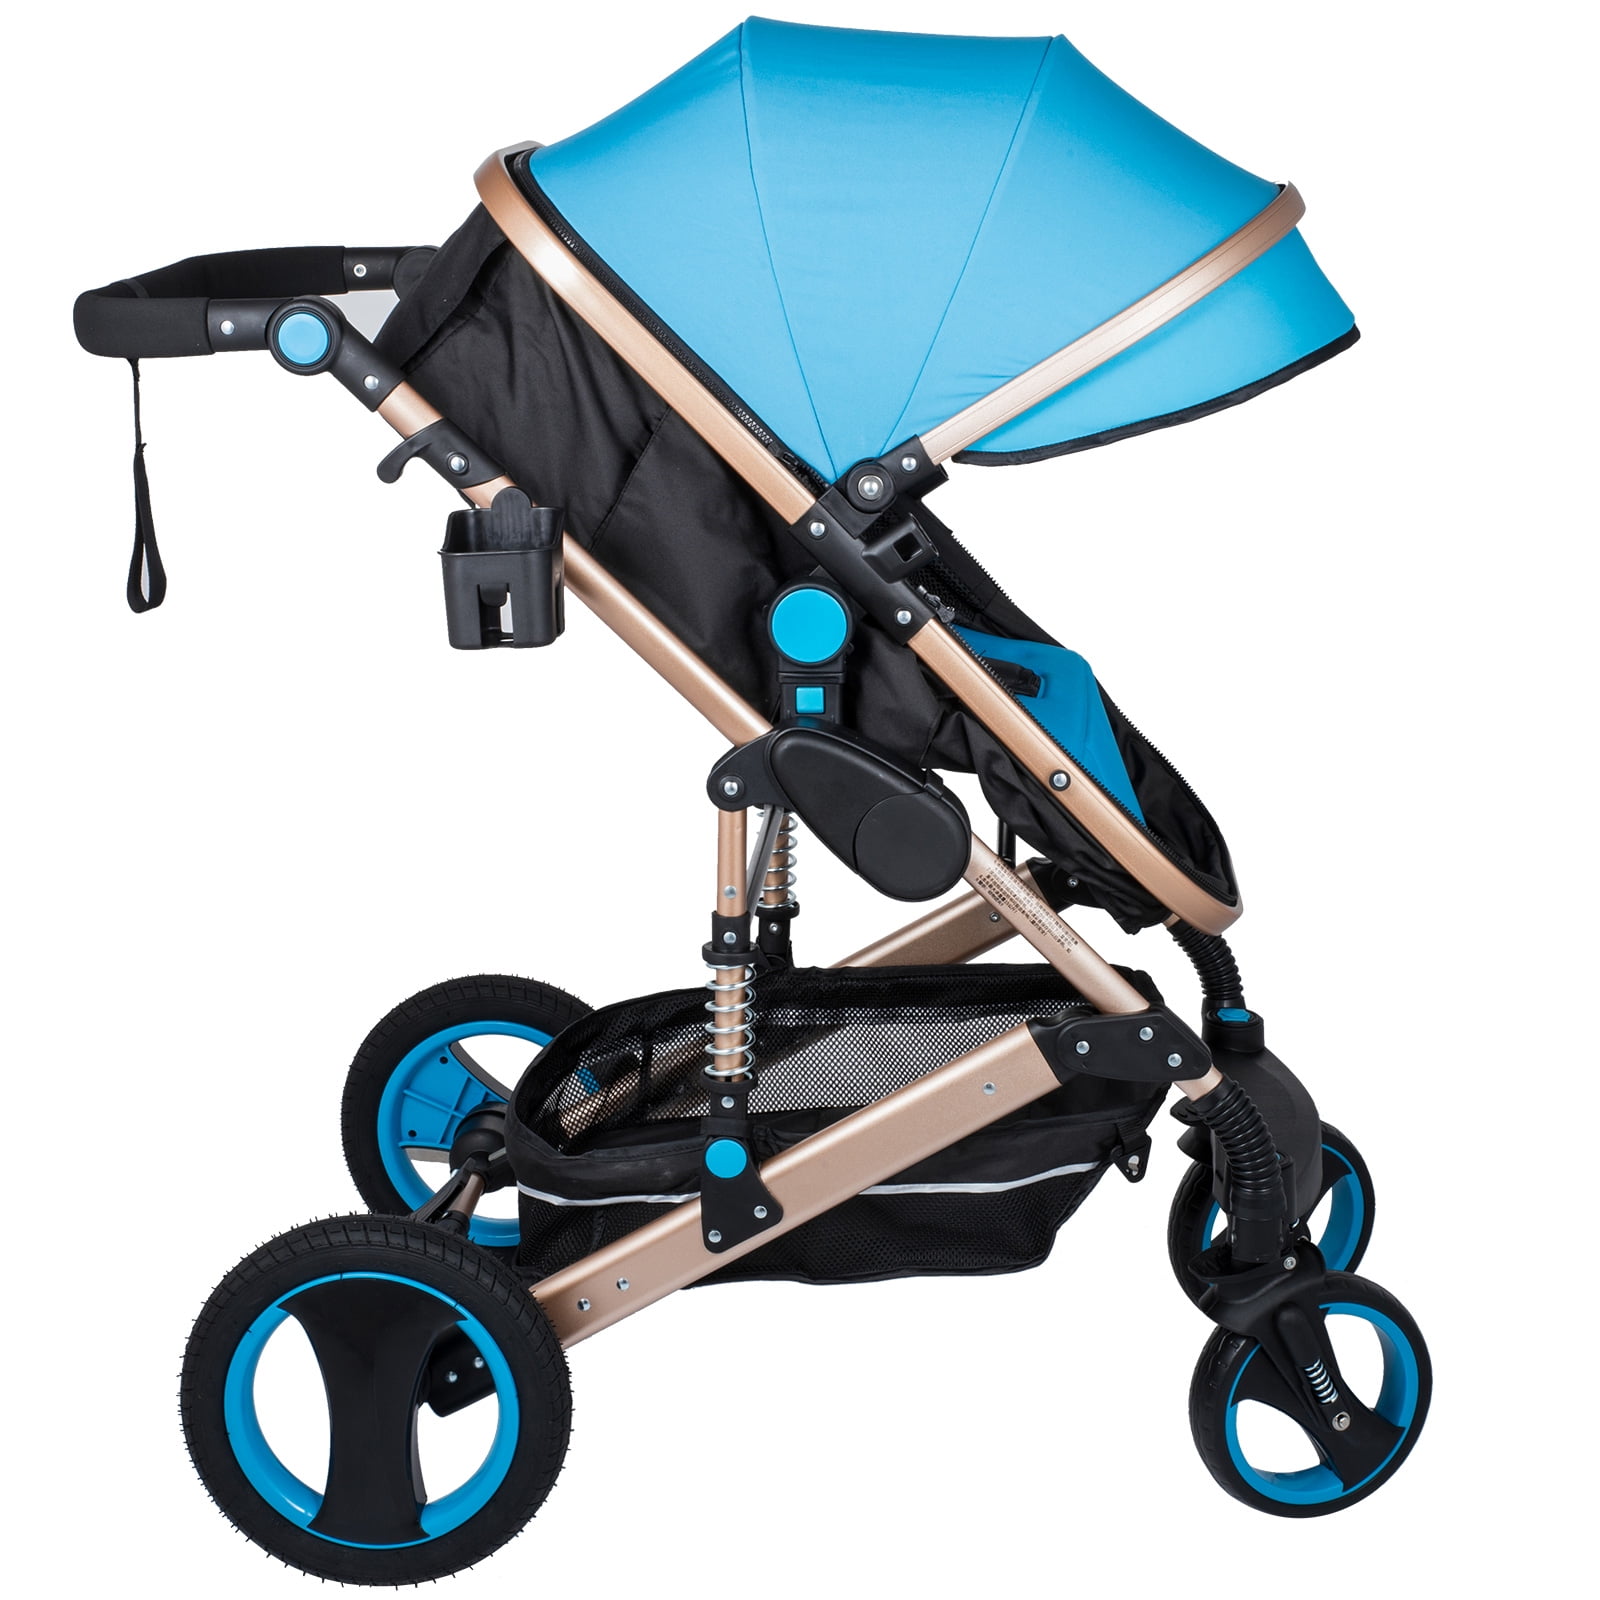 Color : Blue LJYT Convertible Baby Carriage,High Landscape Baby Strollers,Foldable Pram Stroller with Damping Wheels,Large Storage Basket,Extra Include Mommy Bag,Summer Mat and Rain Cover 